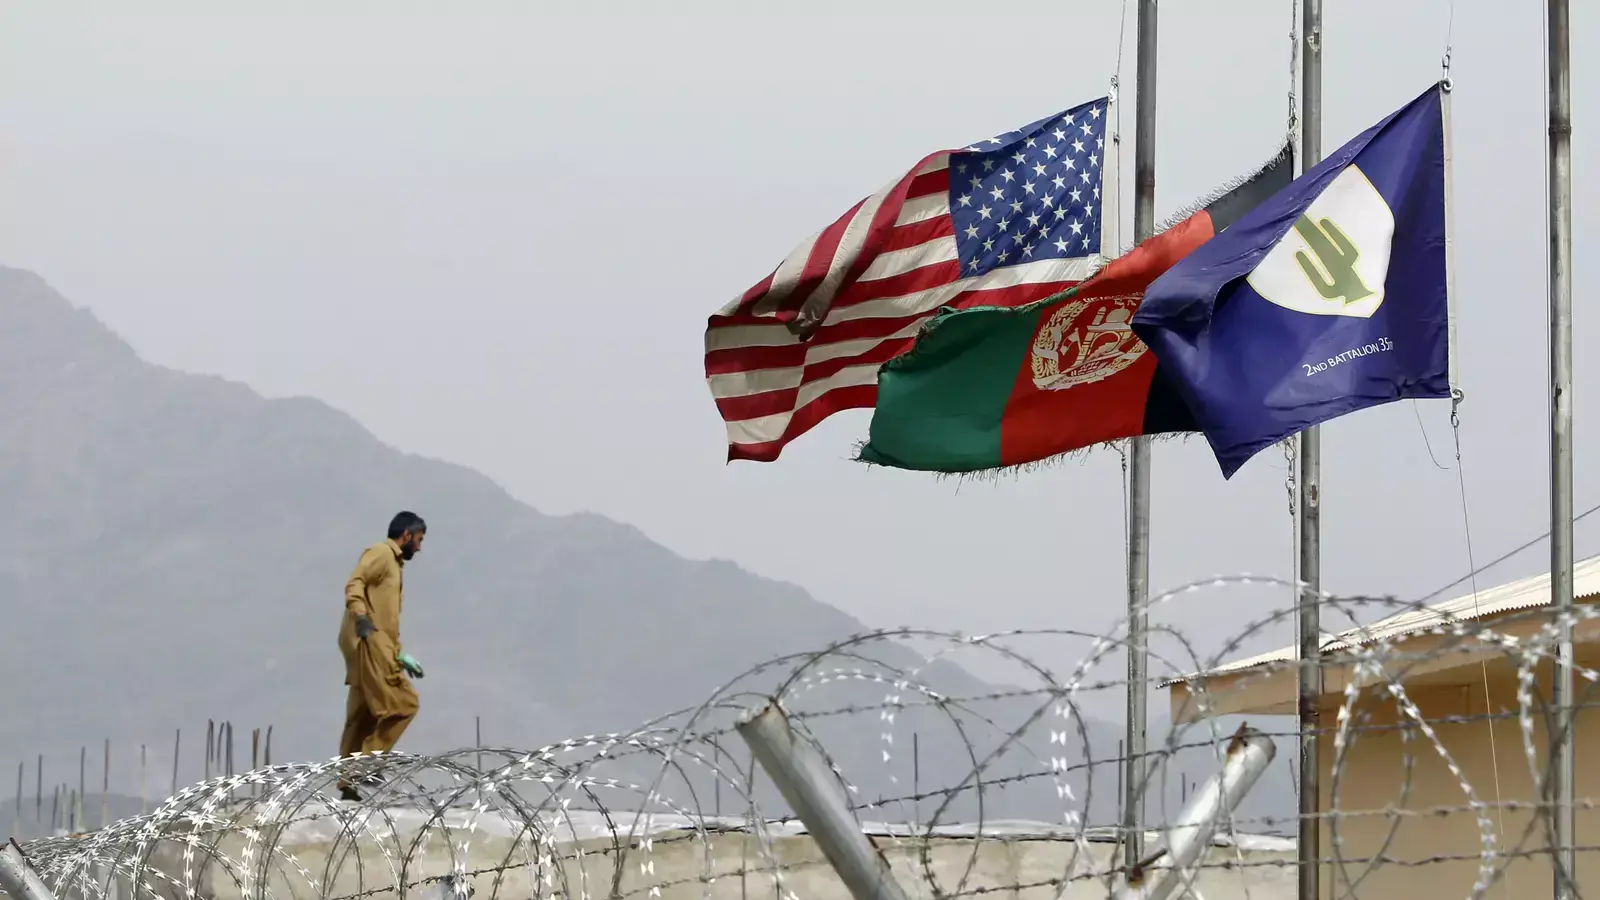 An Afghan working in a U.S military base walks near half mast flags of United States, Afghanistan and Task Force Cacti after a U.S. Army officer was killed by an IED (improvised explosive device) during a patrol in Pesh Valley, at Forward Operating Base J